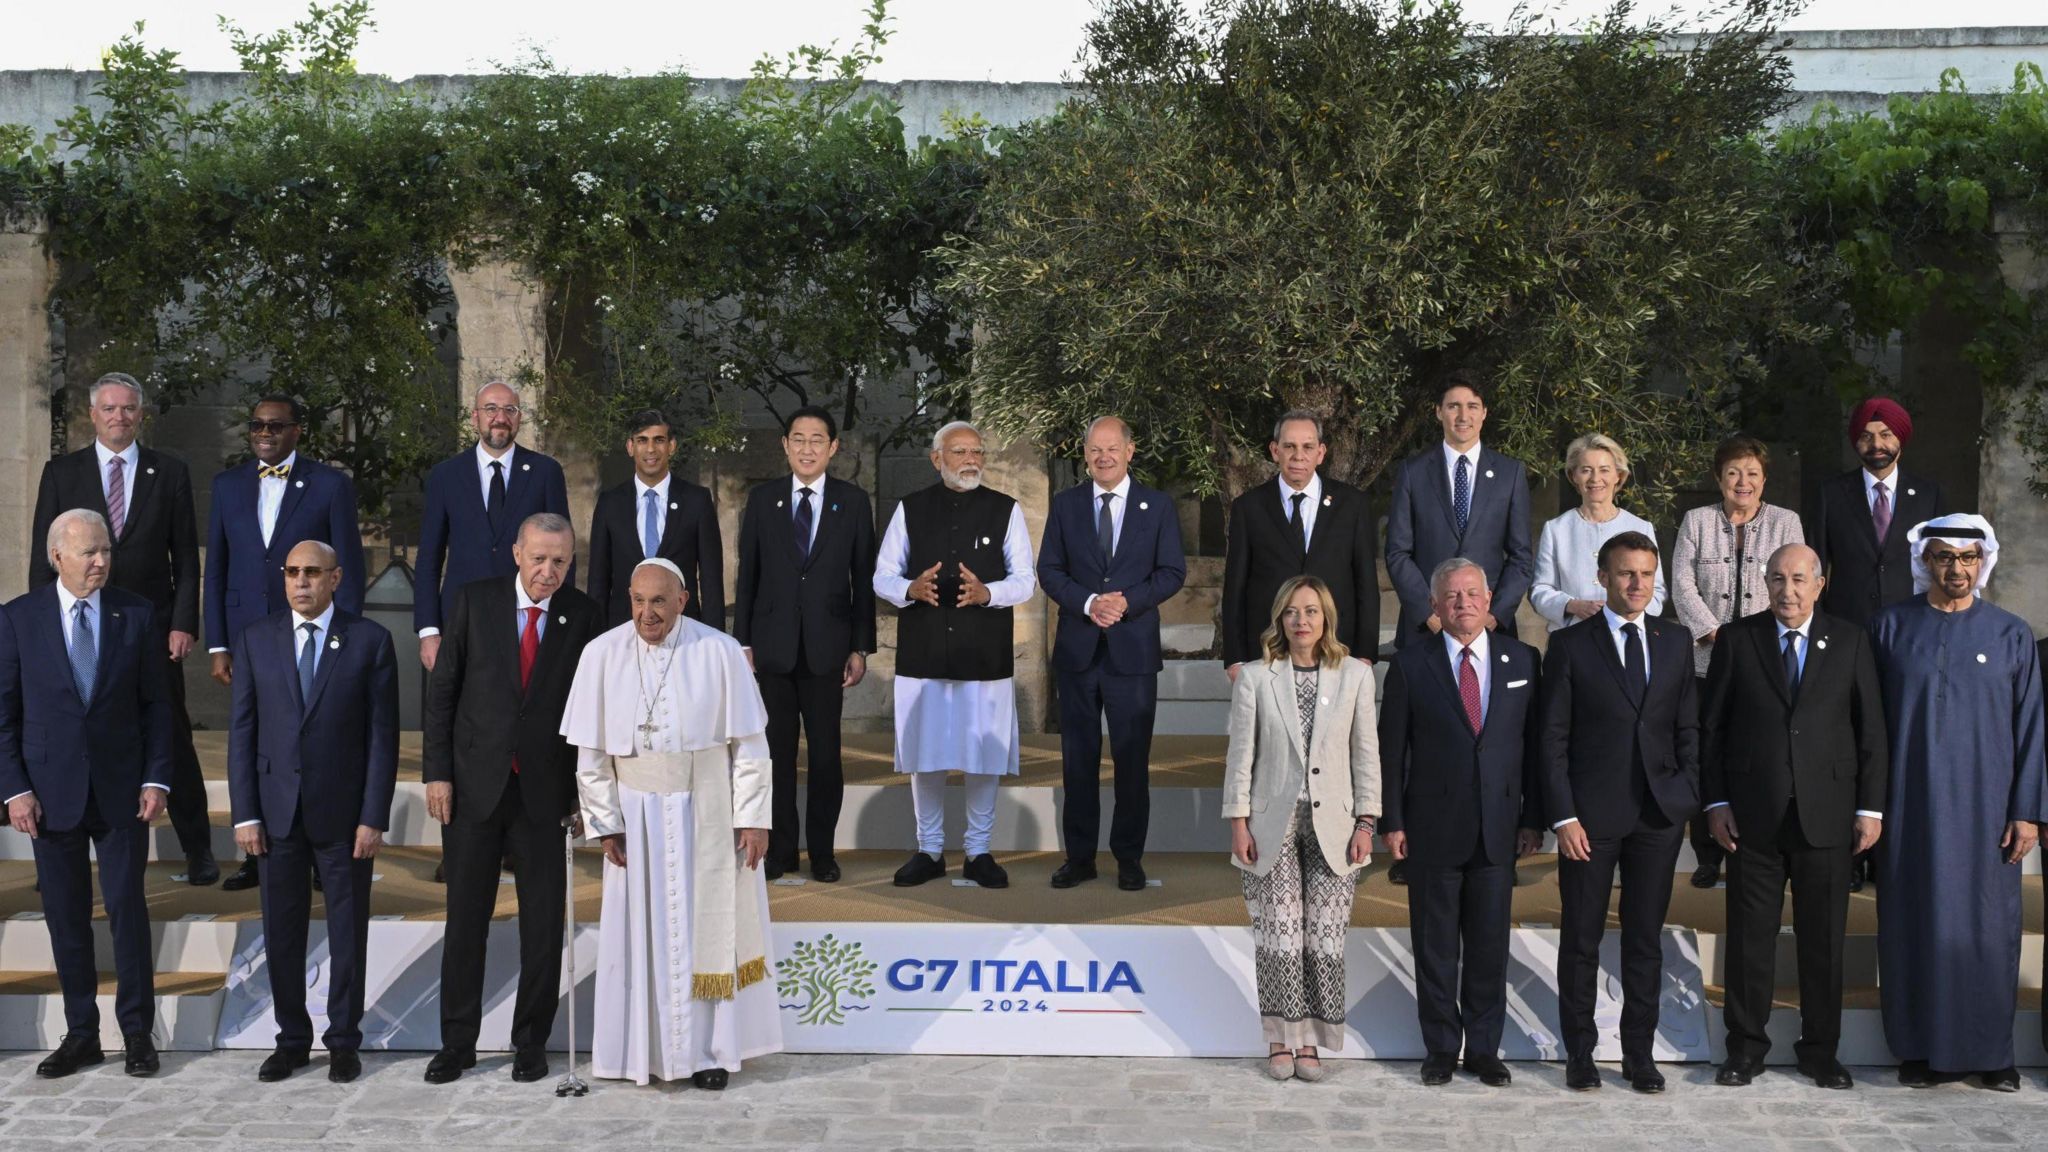 The attendees of the recent G7 summit in Italy